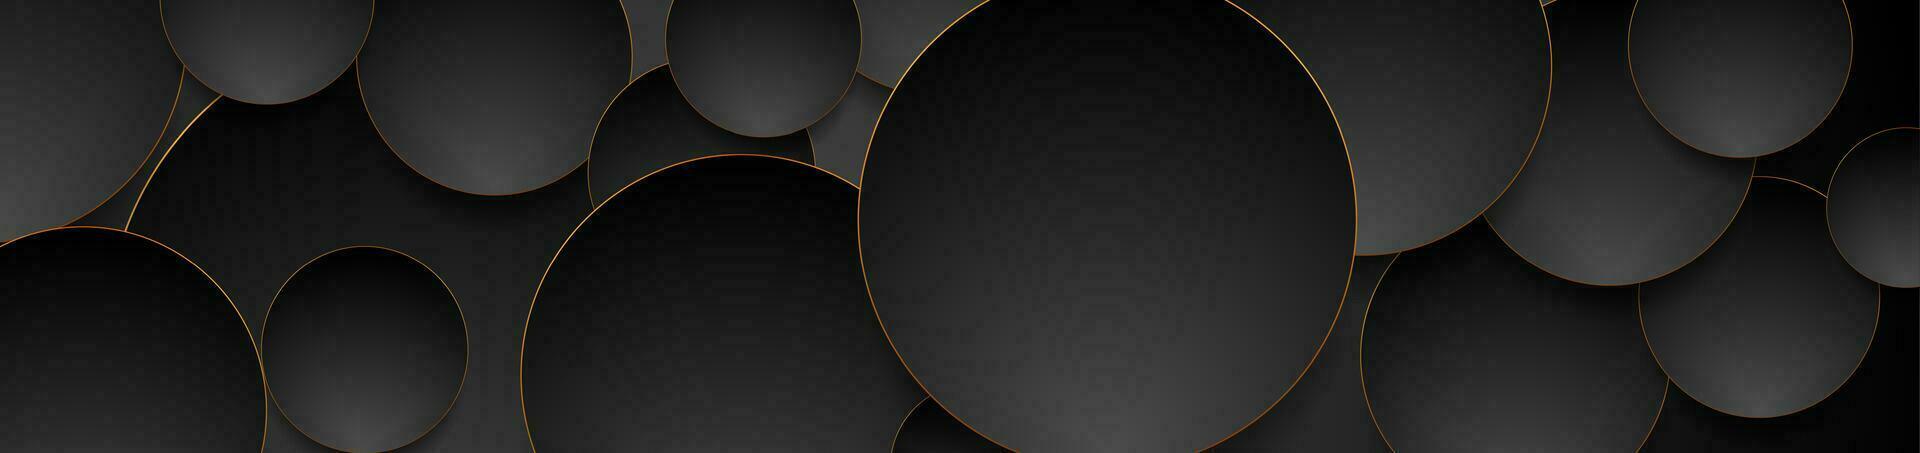 Tech geometric background with abstract golden and black circles vector